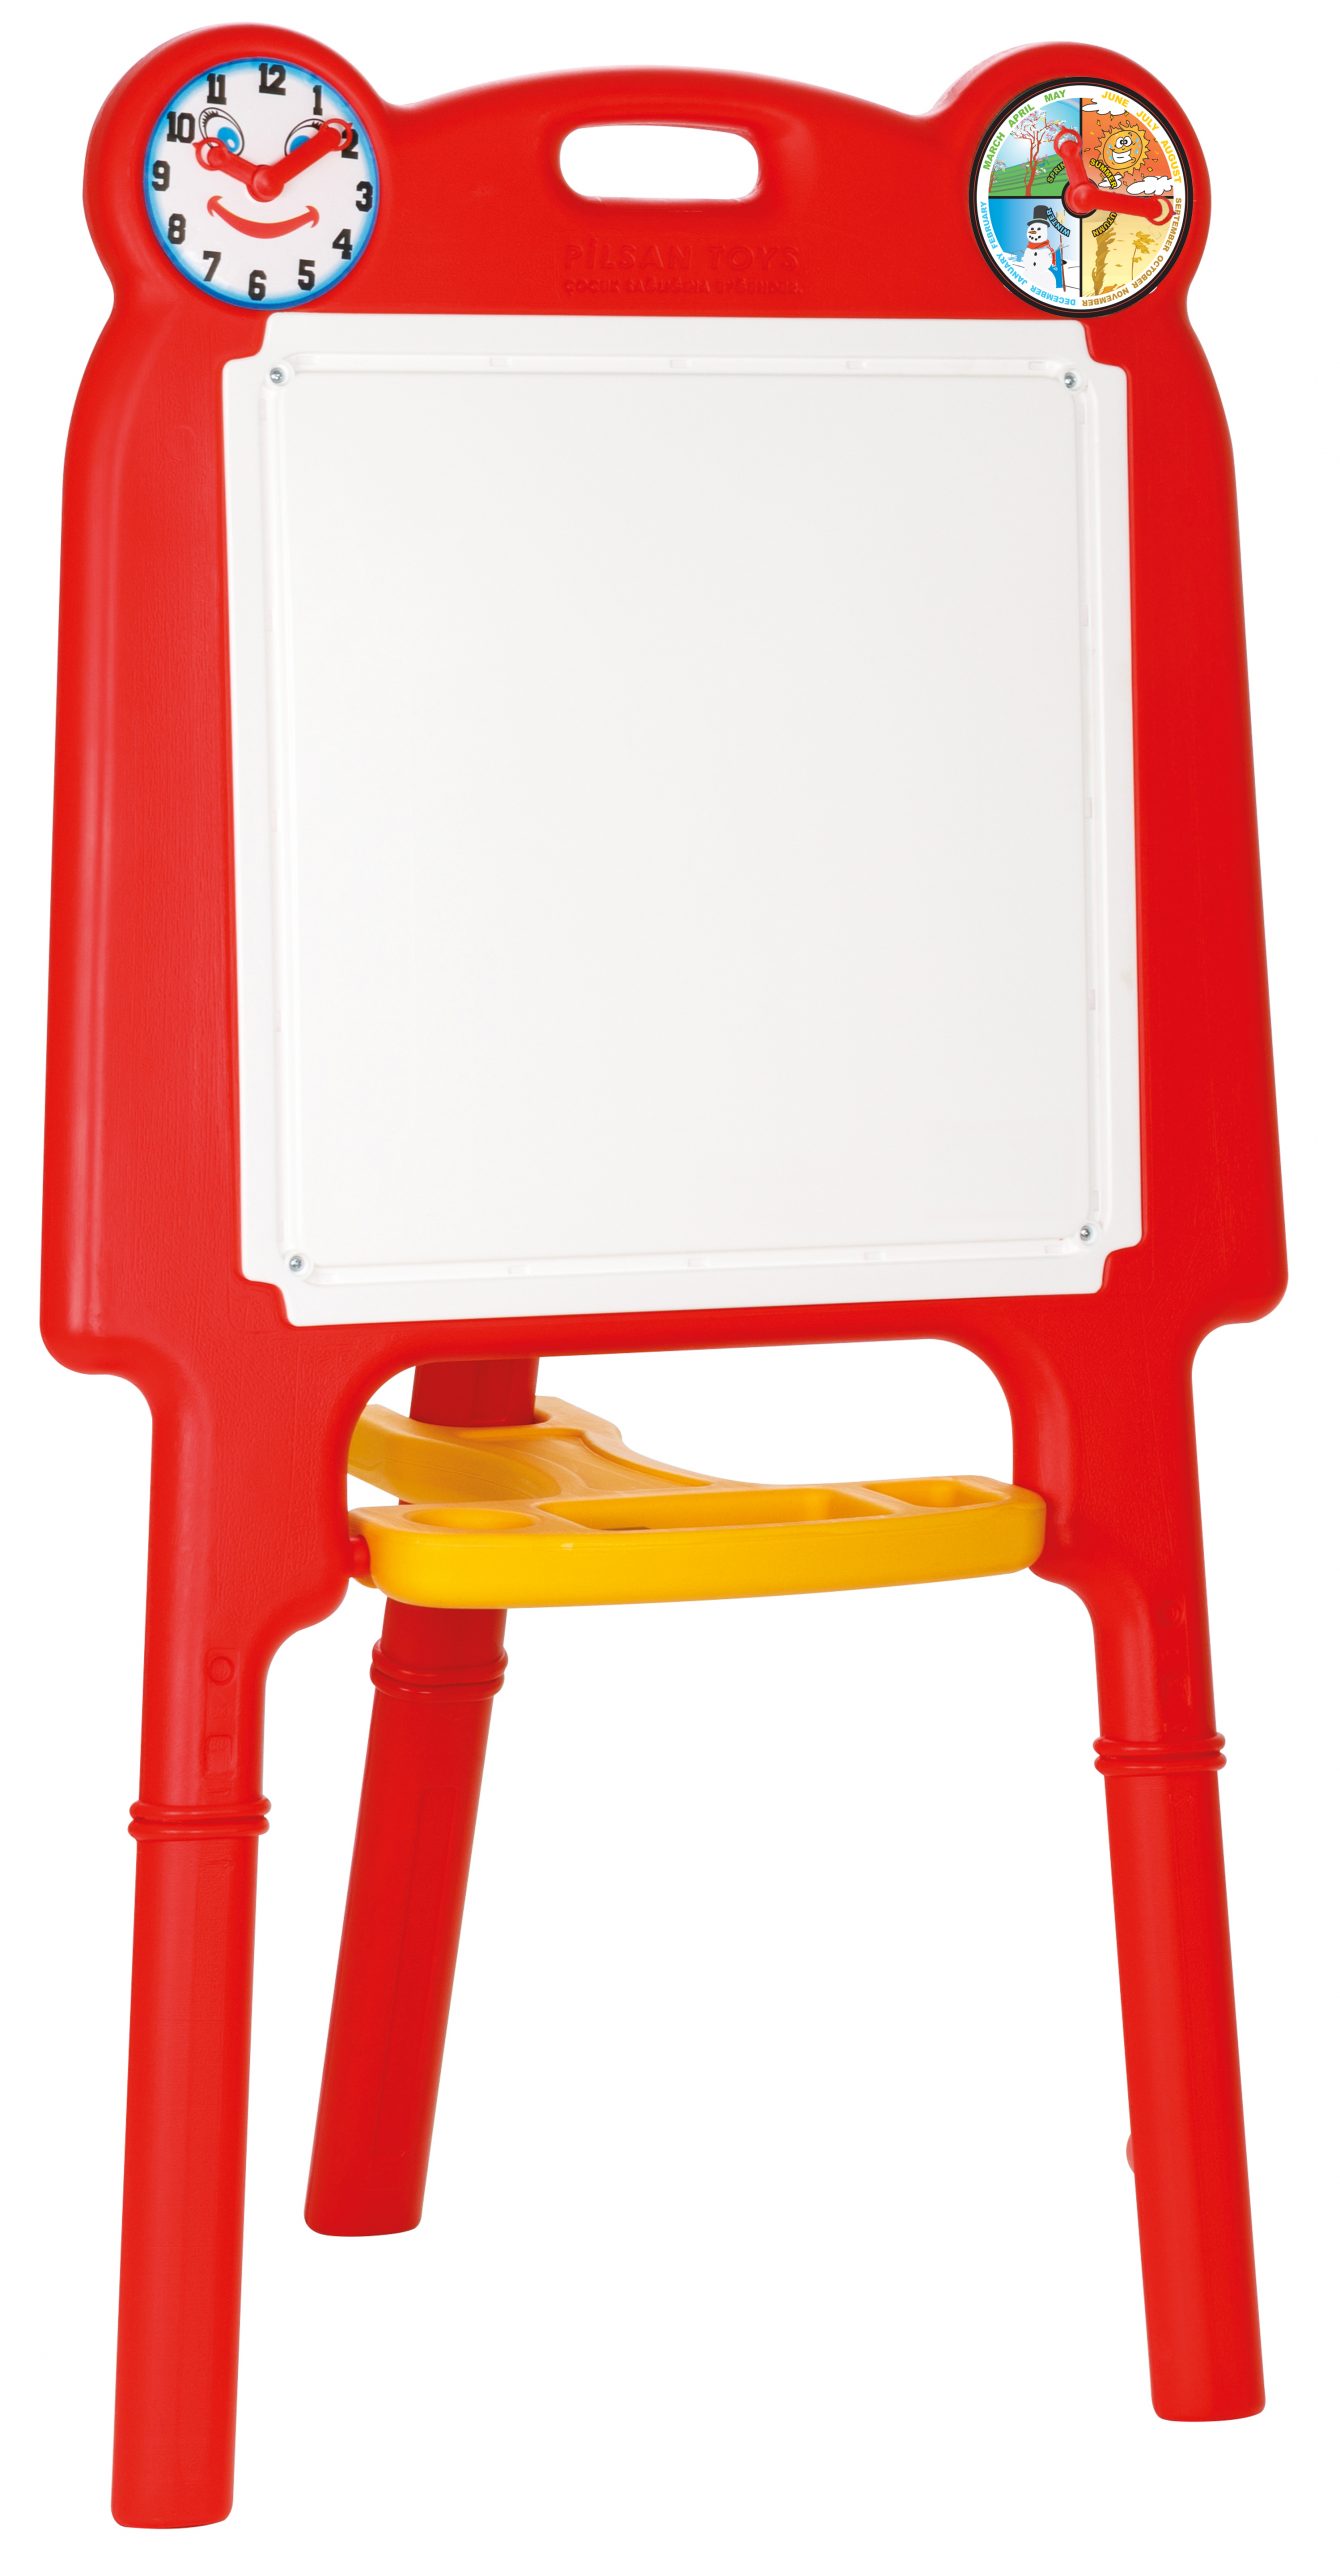 03-413 Smarty Drawing Board Red – Copy